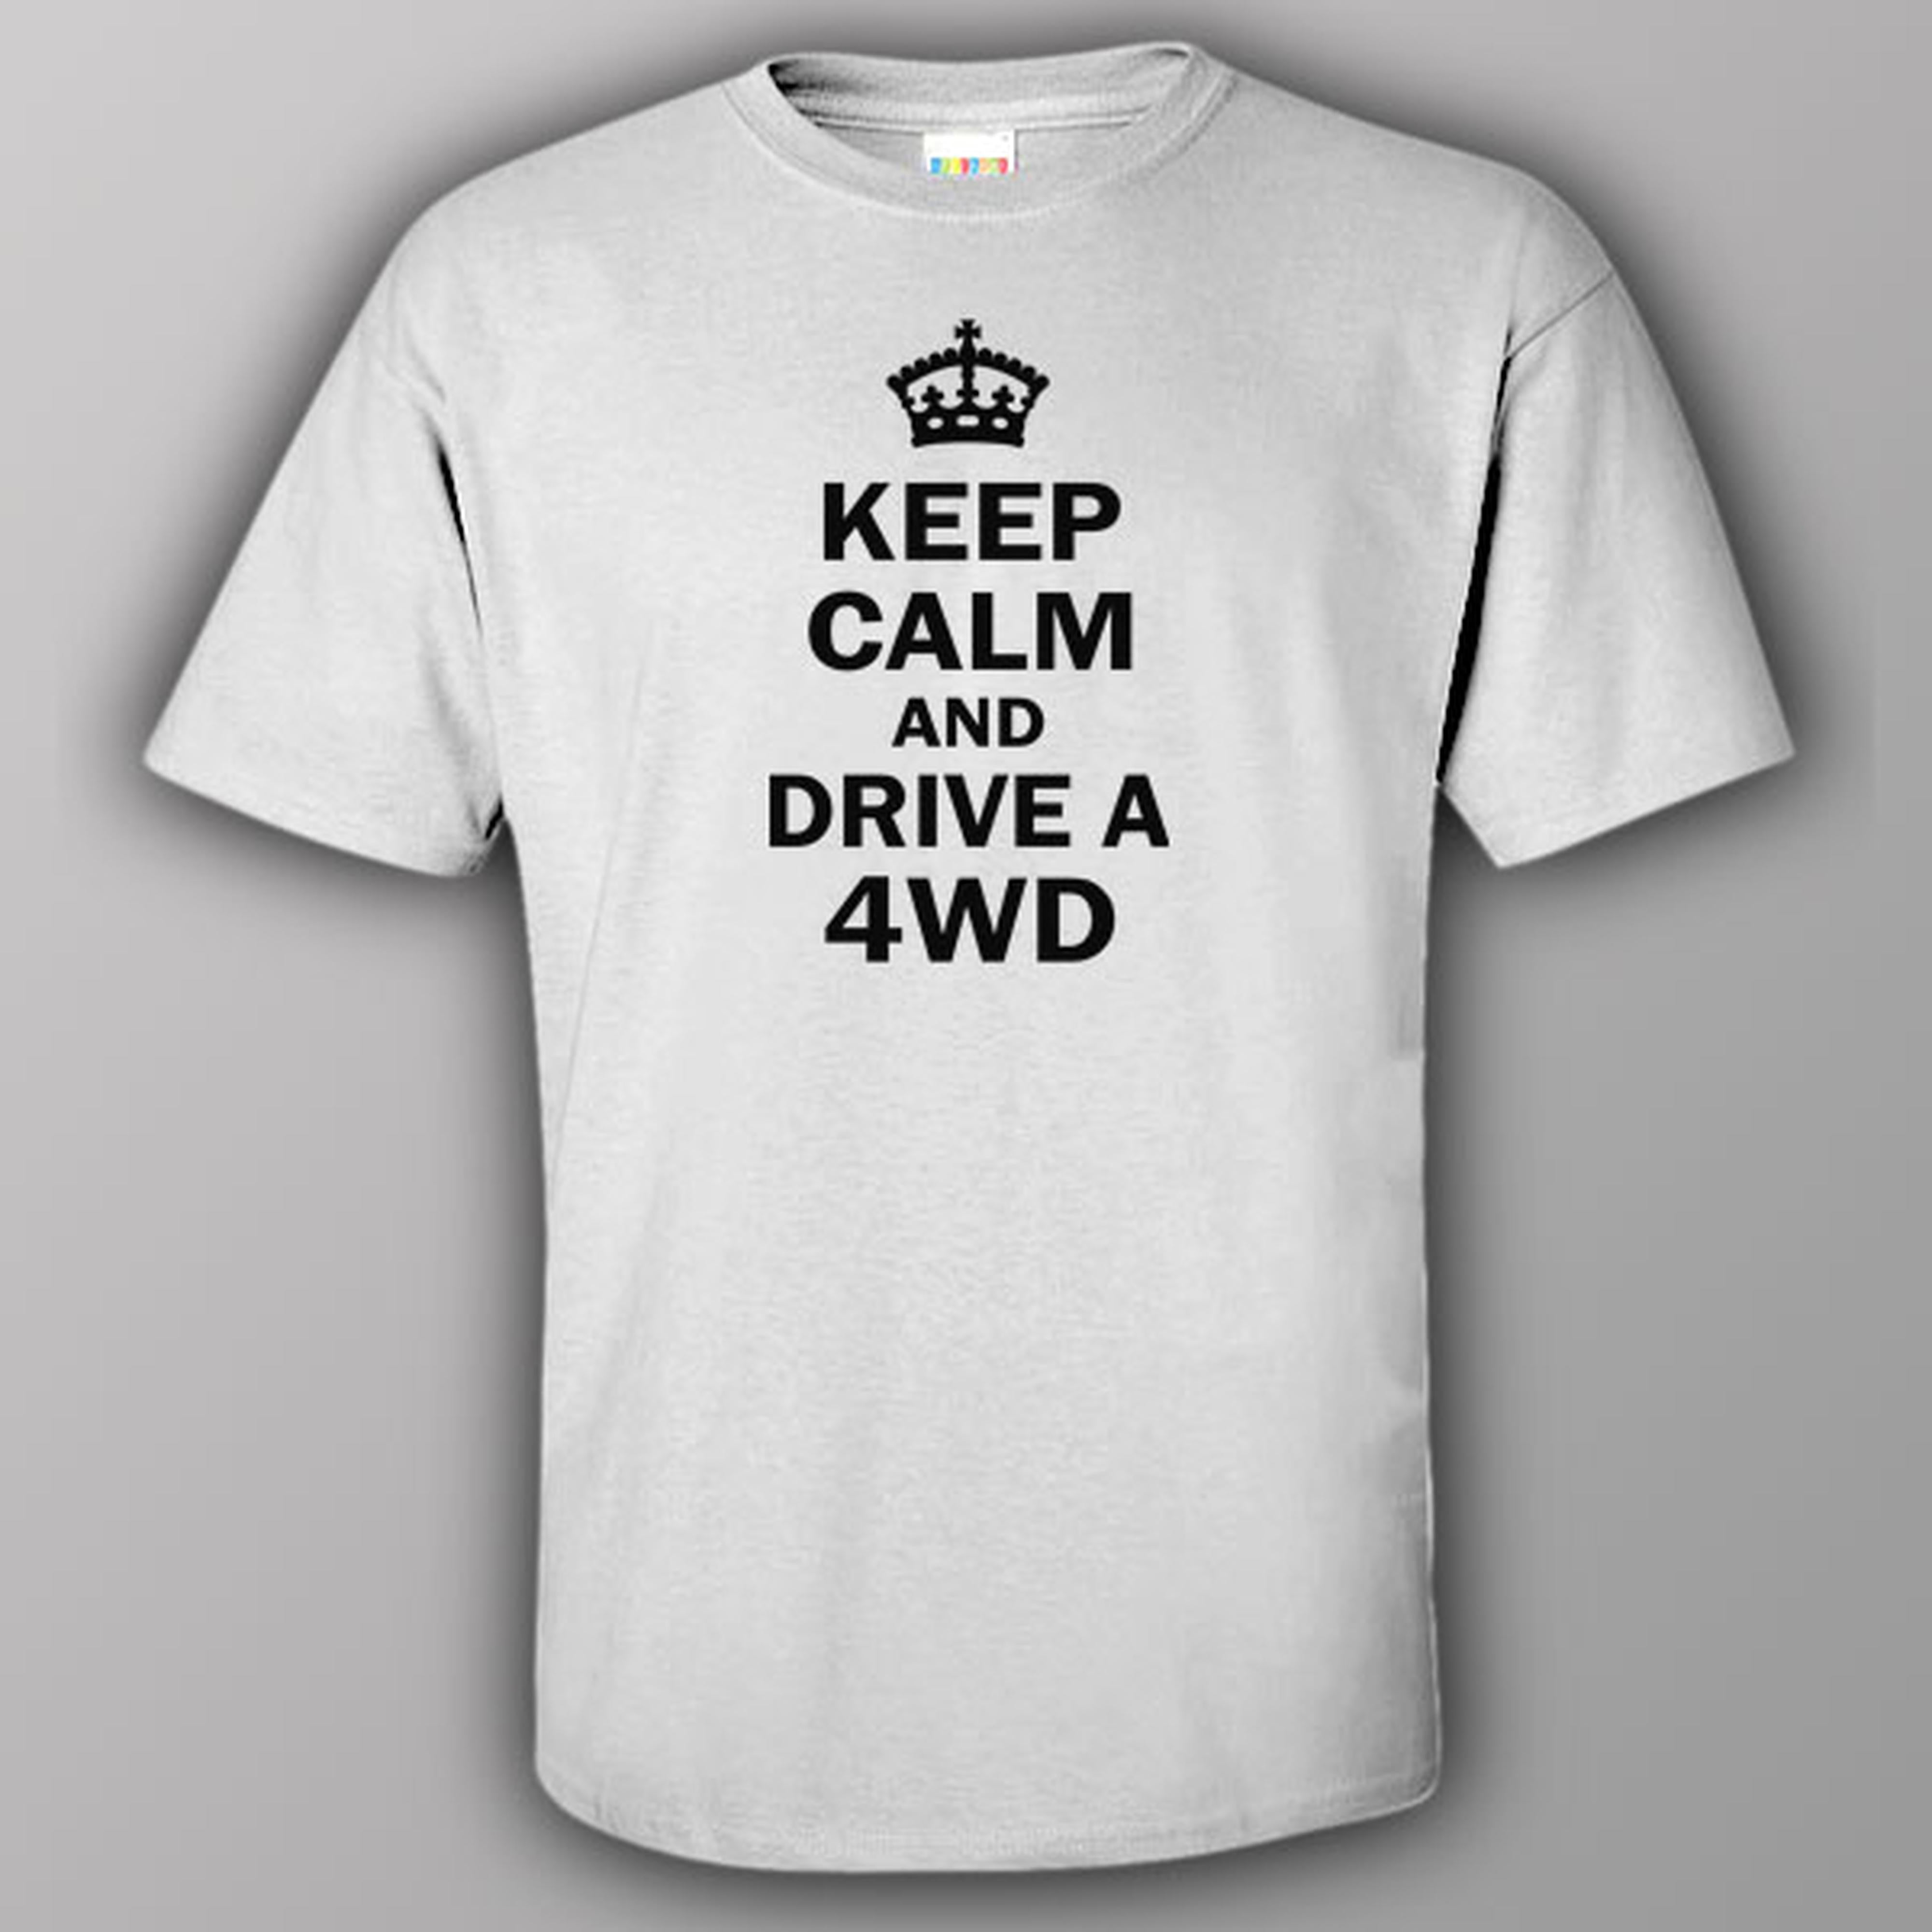 Keep calm and drive a 4WD - T-shirt